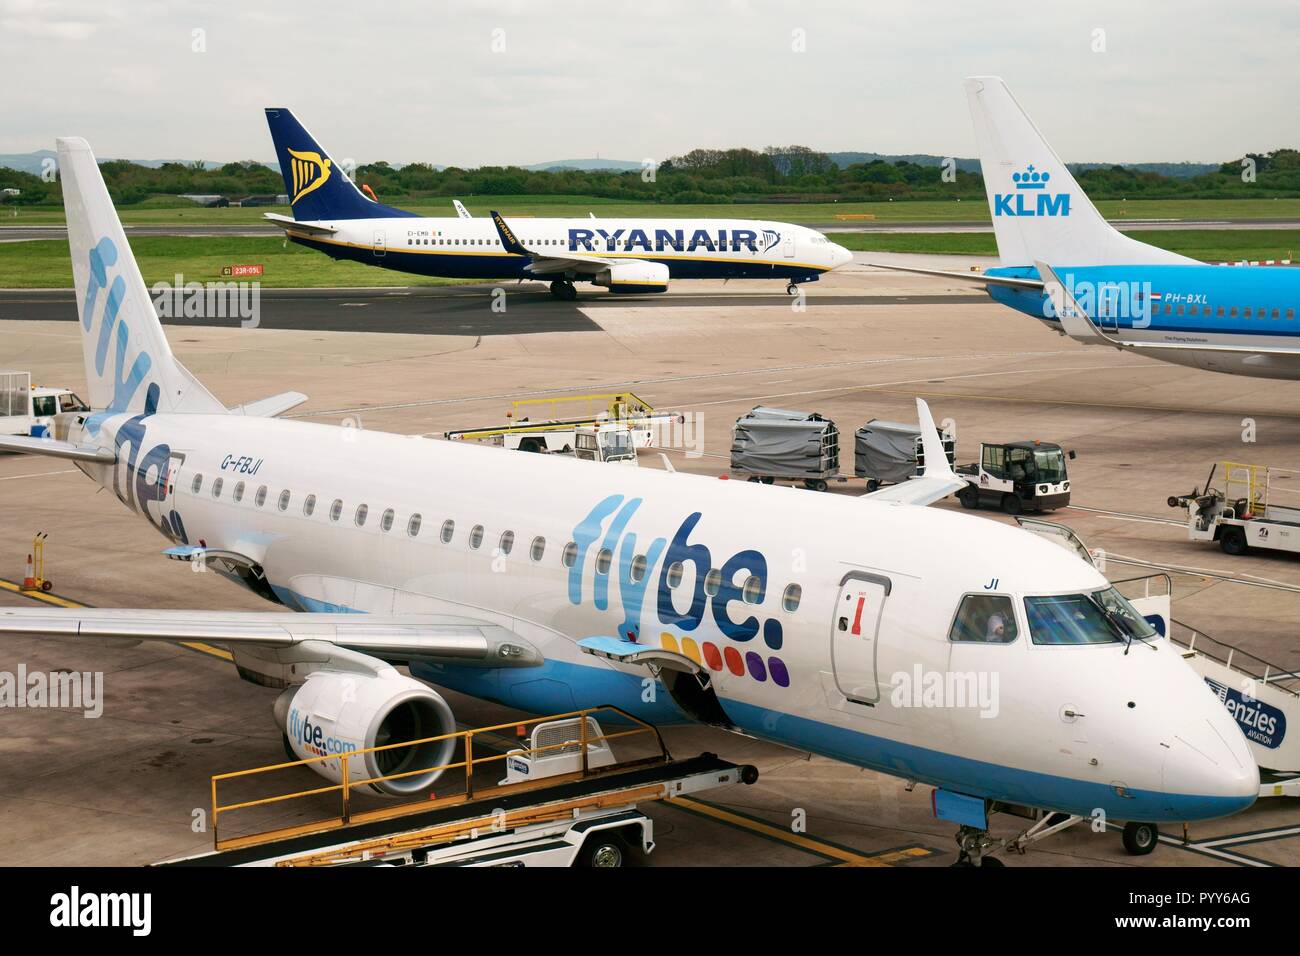 Flybe, Ryanair and KLM passenger plane jet aircraft airplane on runway apron seen from boarding gates of Manchester Airport Terminal Building, England Stock Photo